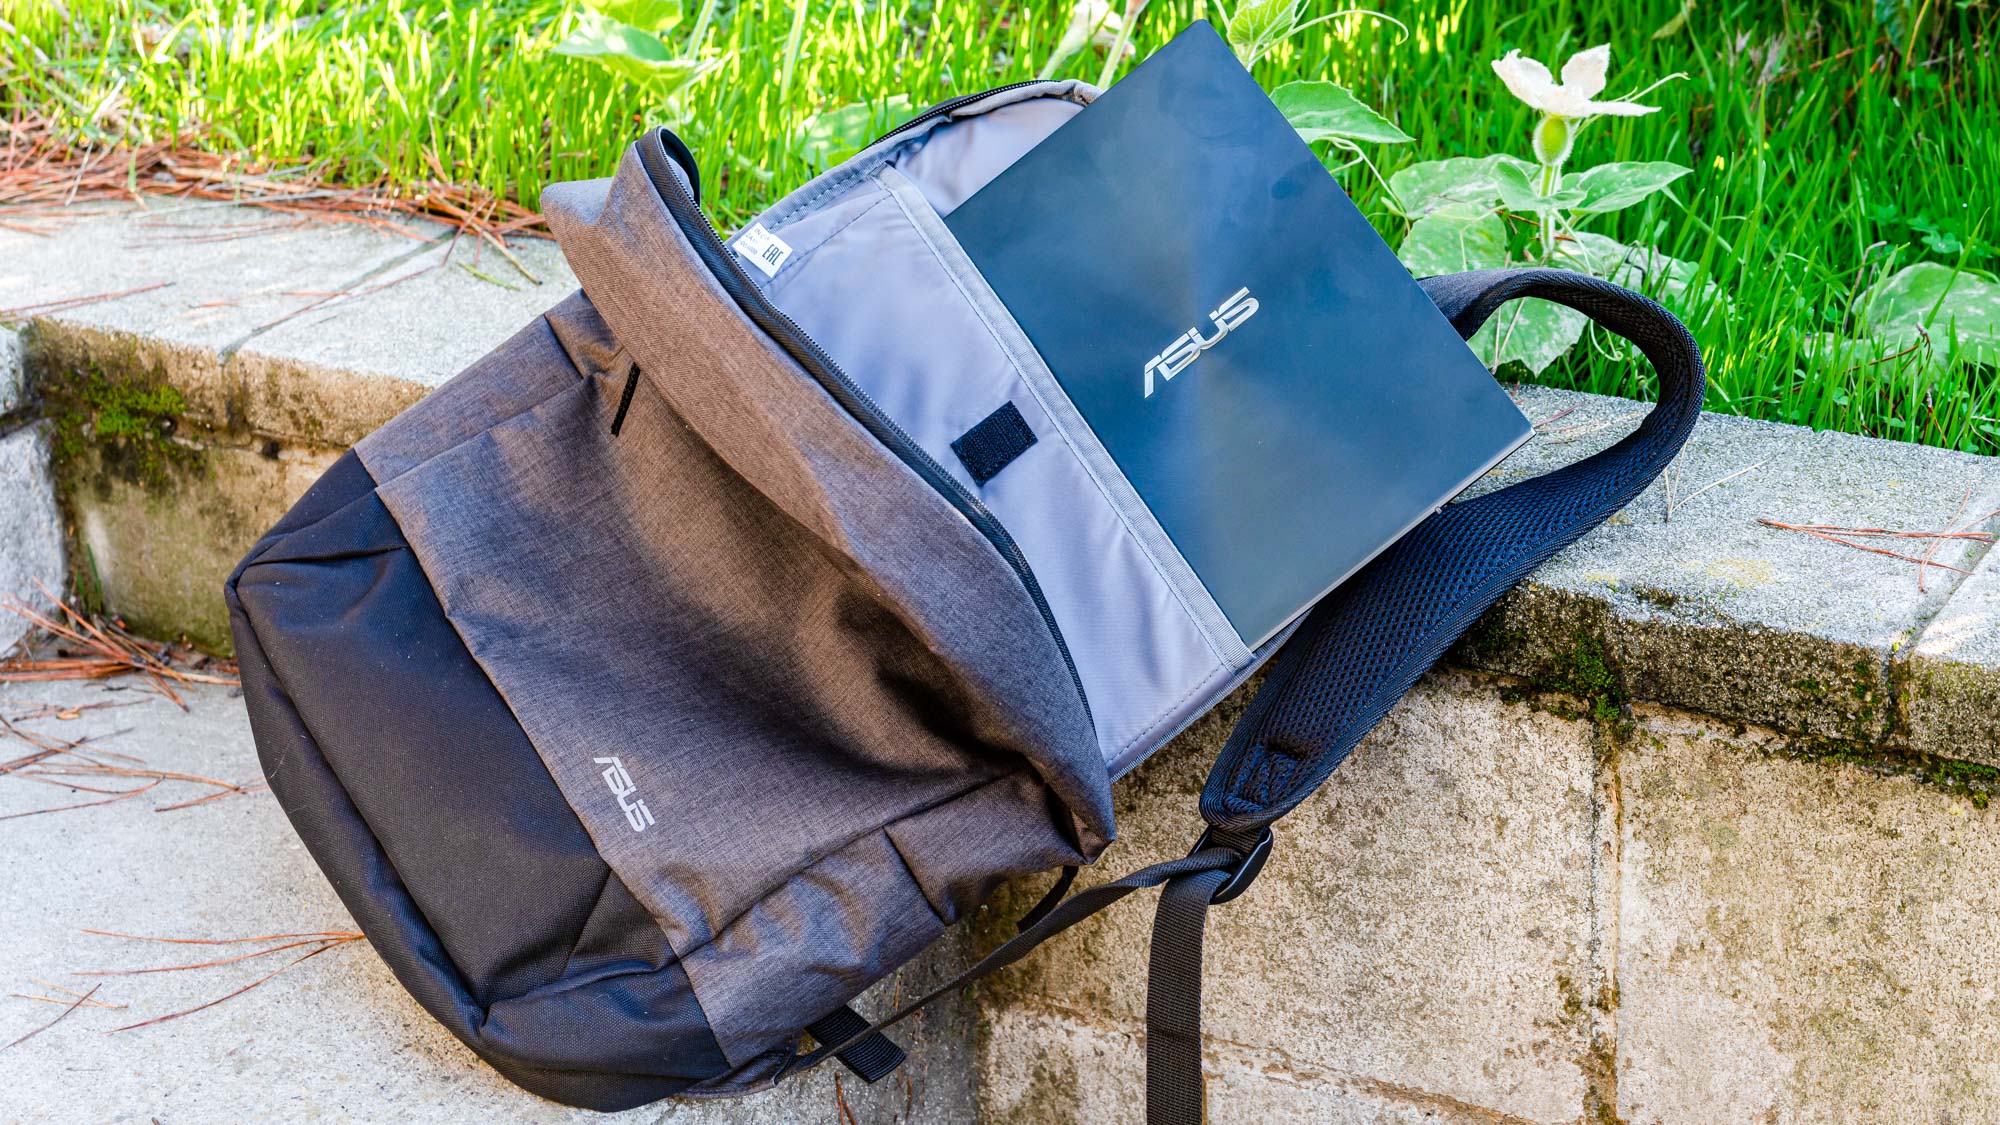 Asus ZenBook Pro Duo 15 OLED in backpack